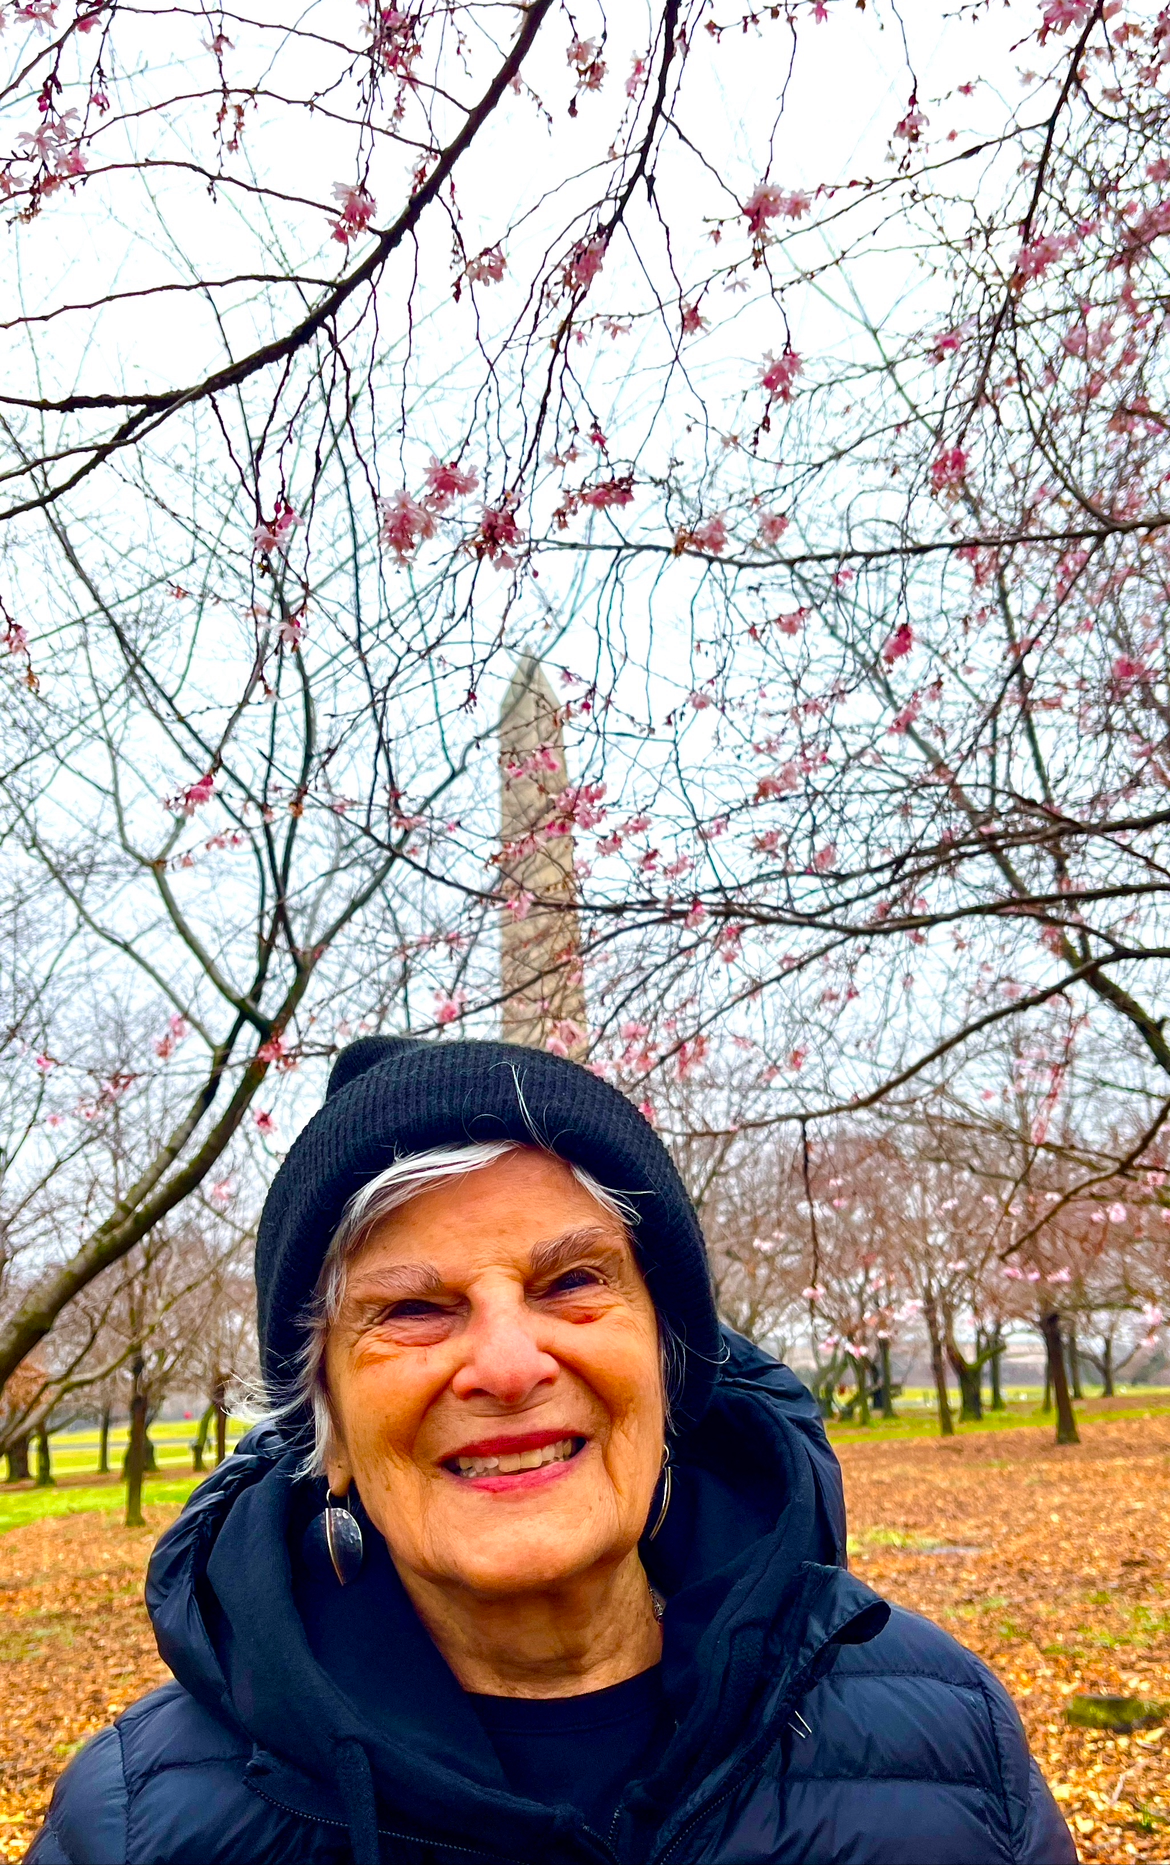 A person smiling in front of a monument

Description automatically generated